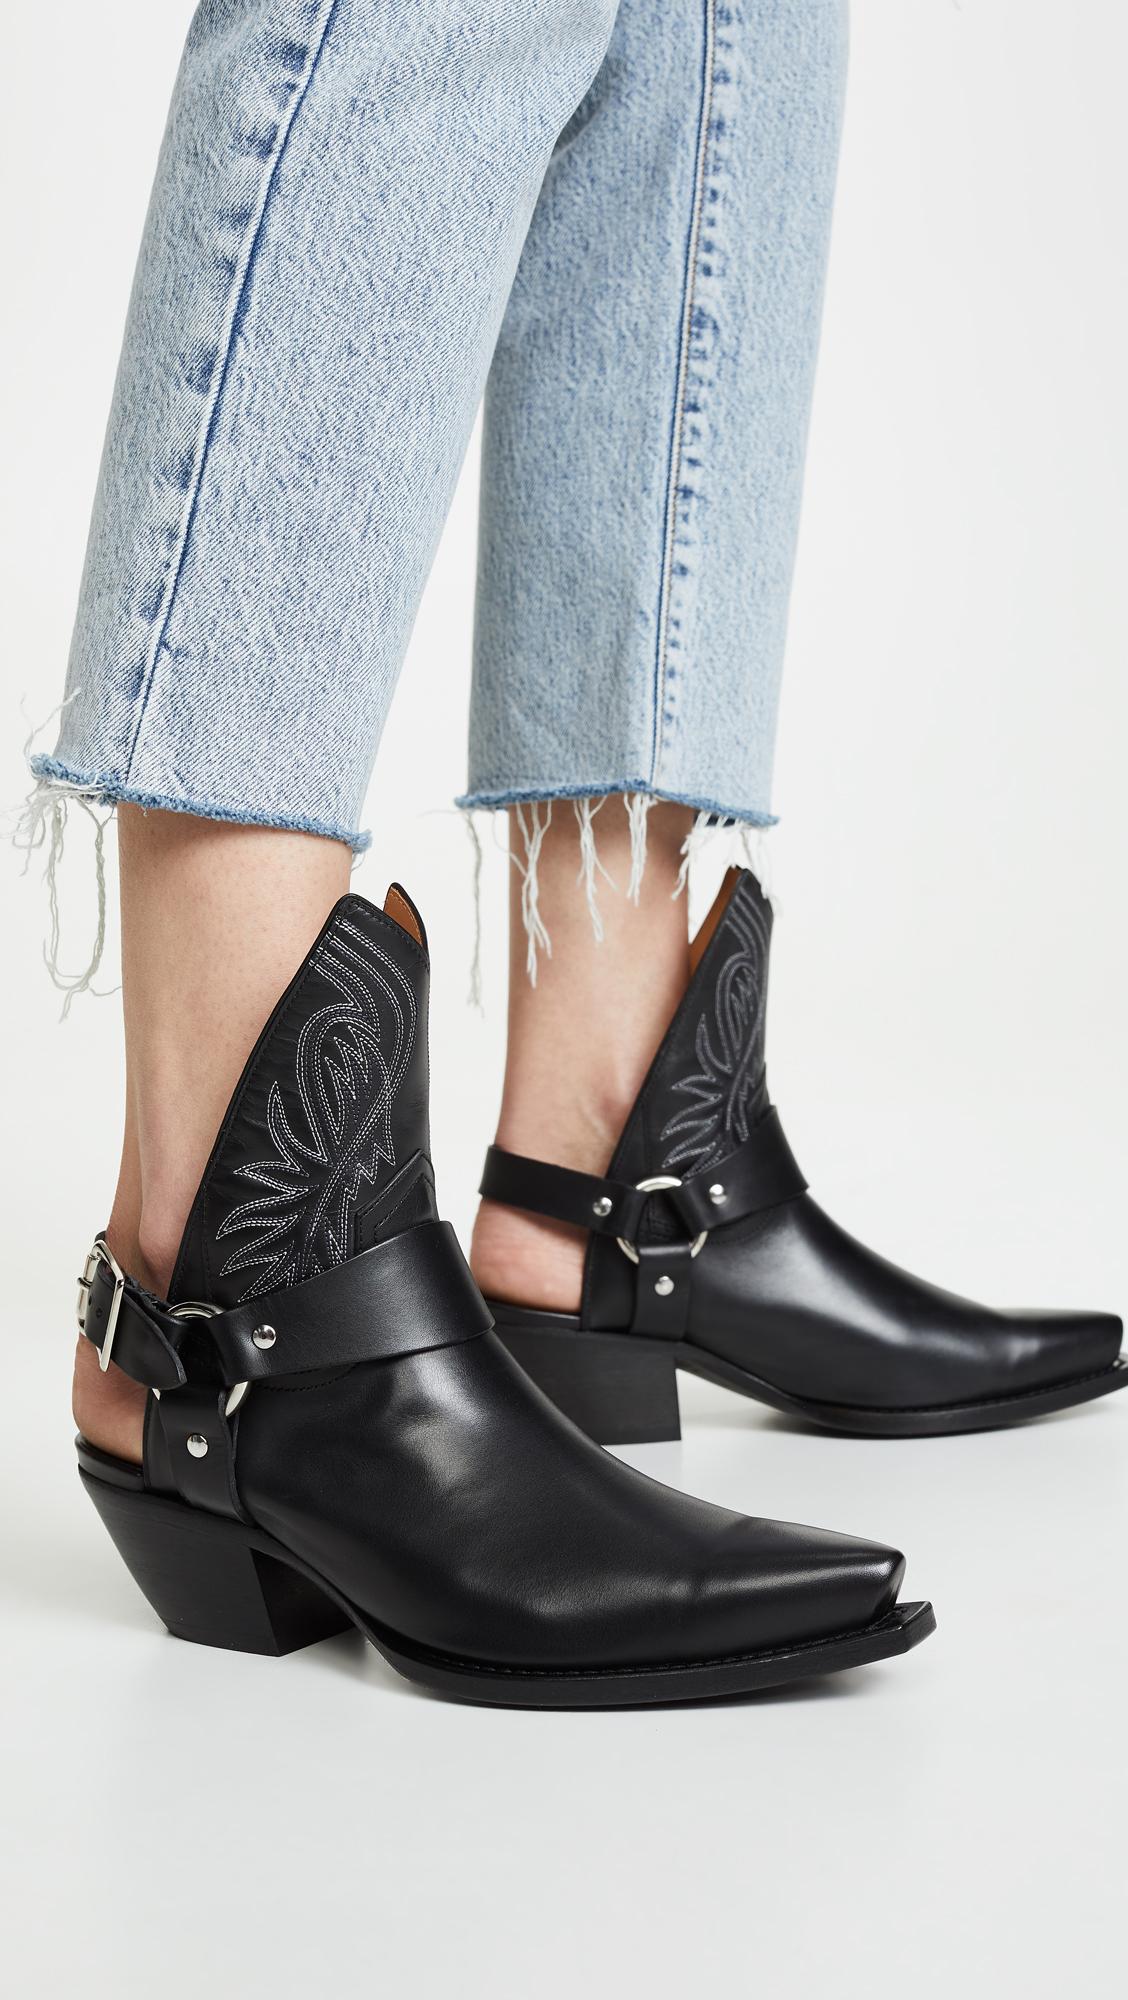 R13 Ankle Half Cowboy Boots W/ Harness in Black | Lyst